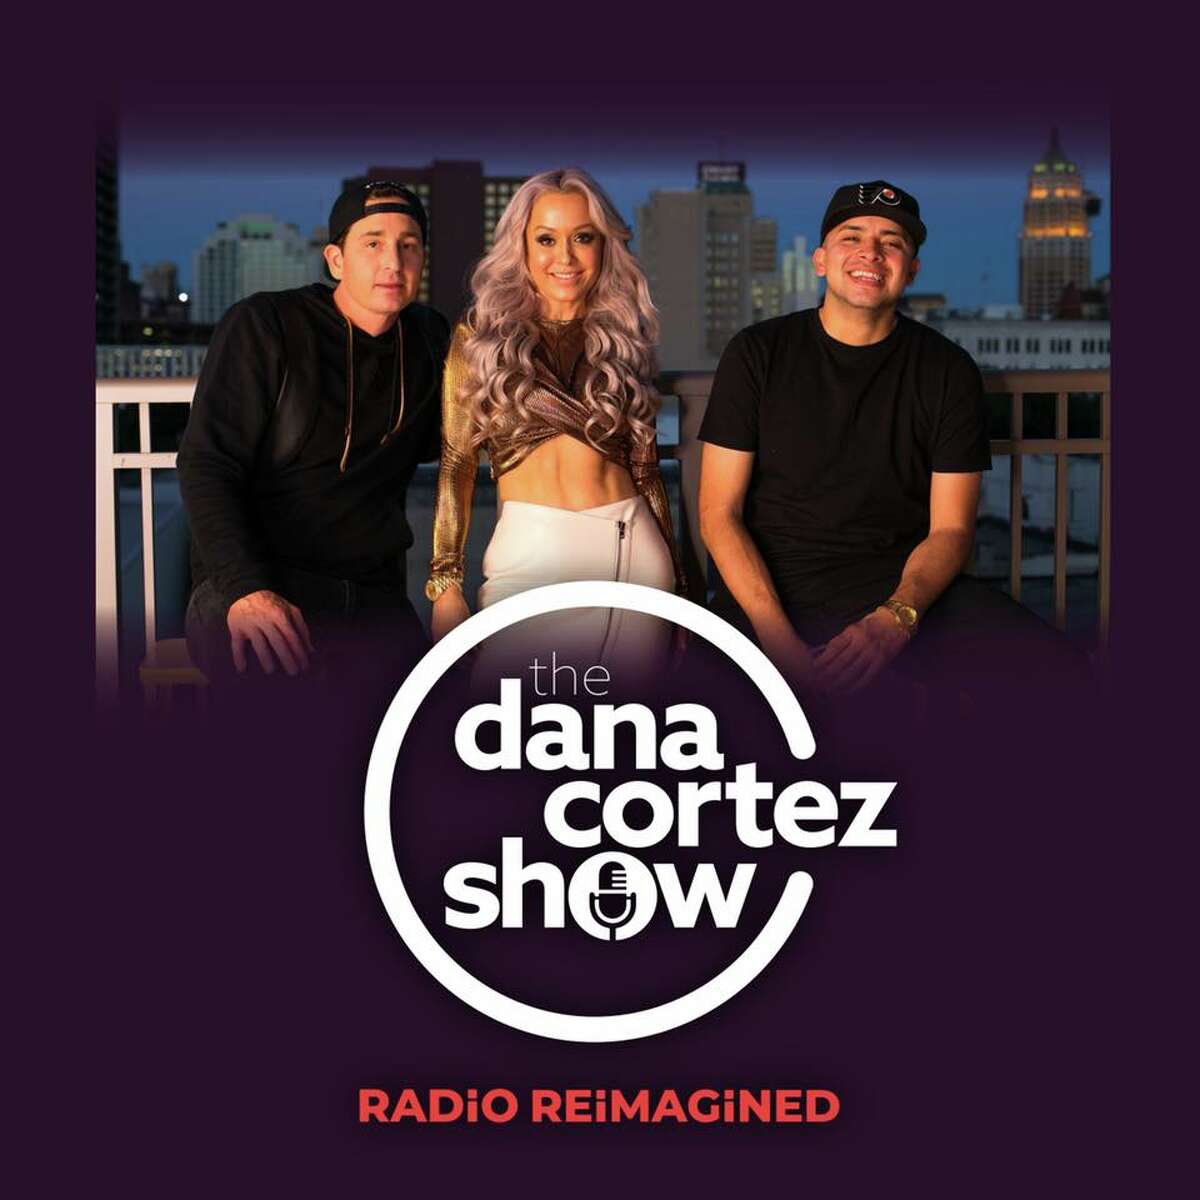 The Dana Cortez Show, previously part of the Univision family, announced Friday that the team has partnered with ABC Radio and Skyview Networks, making the local morning voice "one of radio's first Latinas to host a nationally syndicated show," according to AllAccess.com.